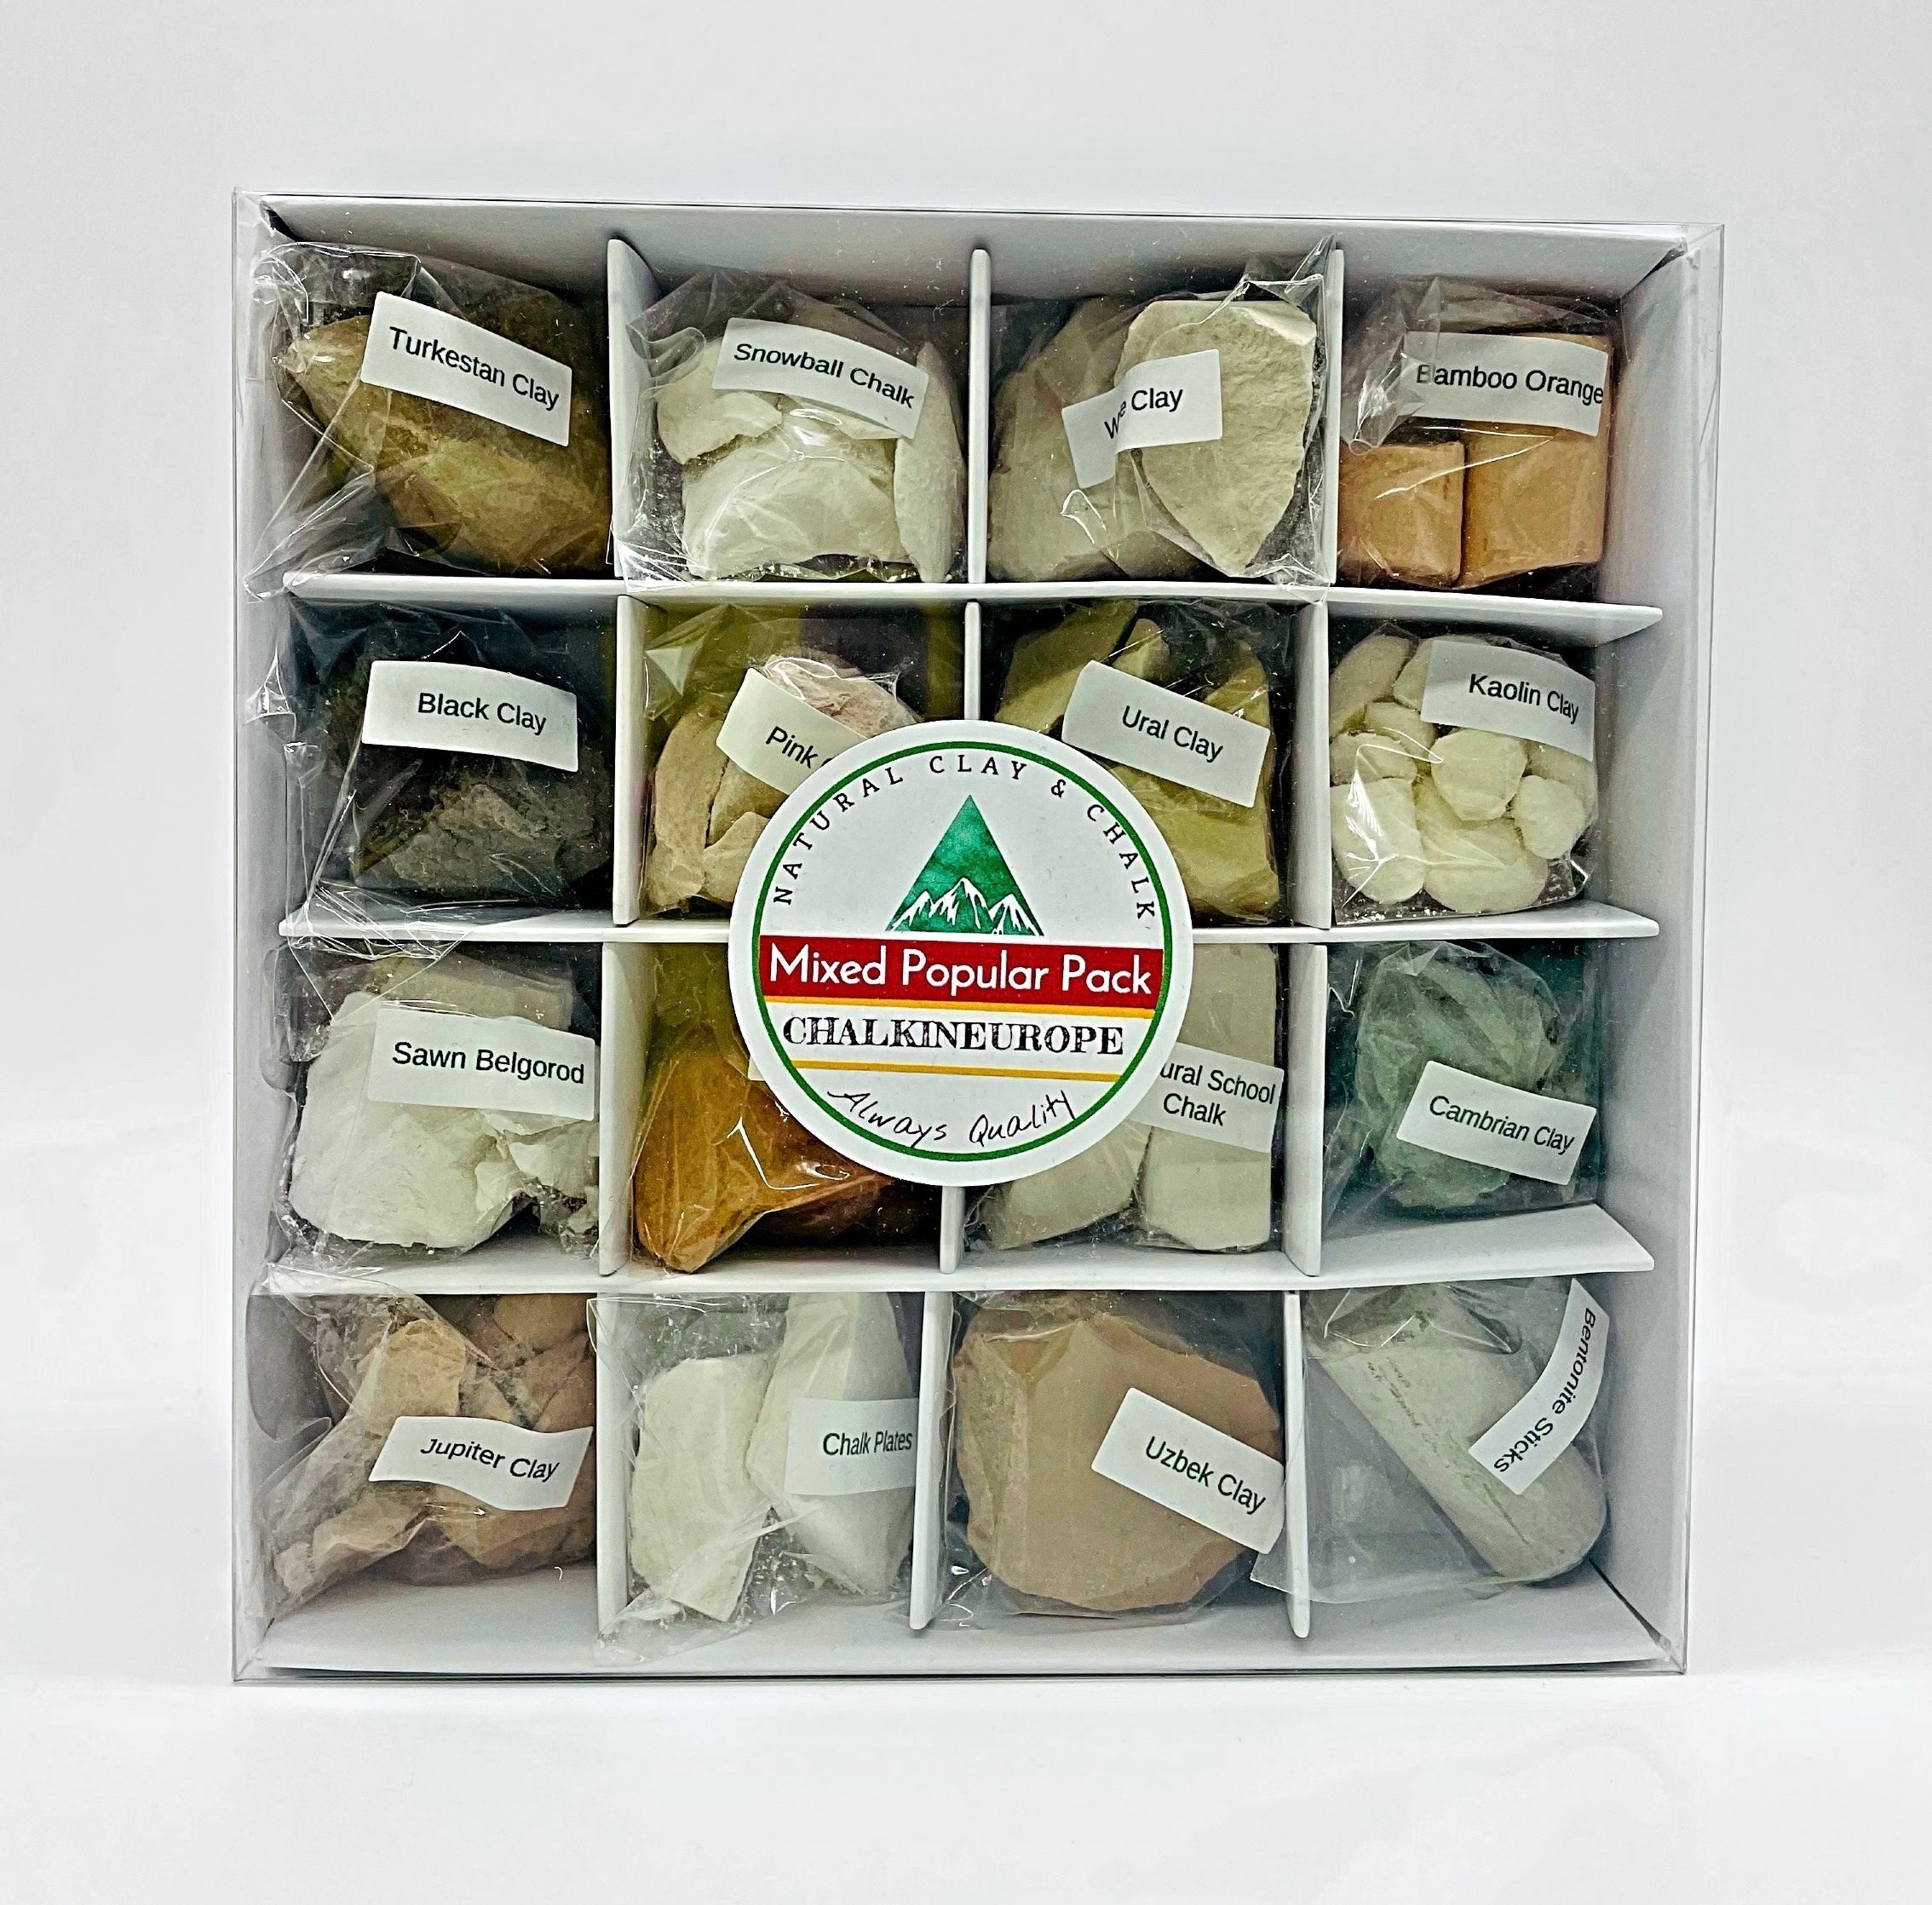 Edible Clay And Chalk Samples - Try Edible Chalk